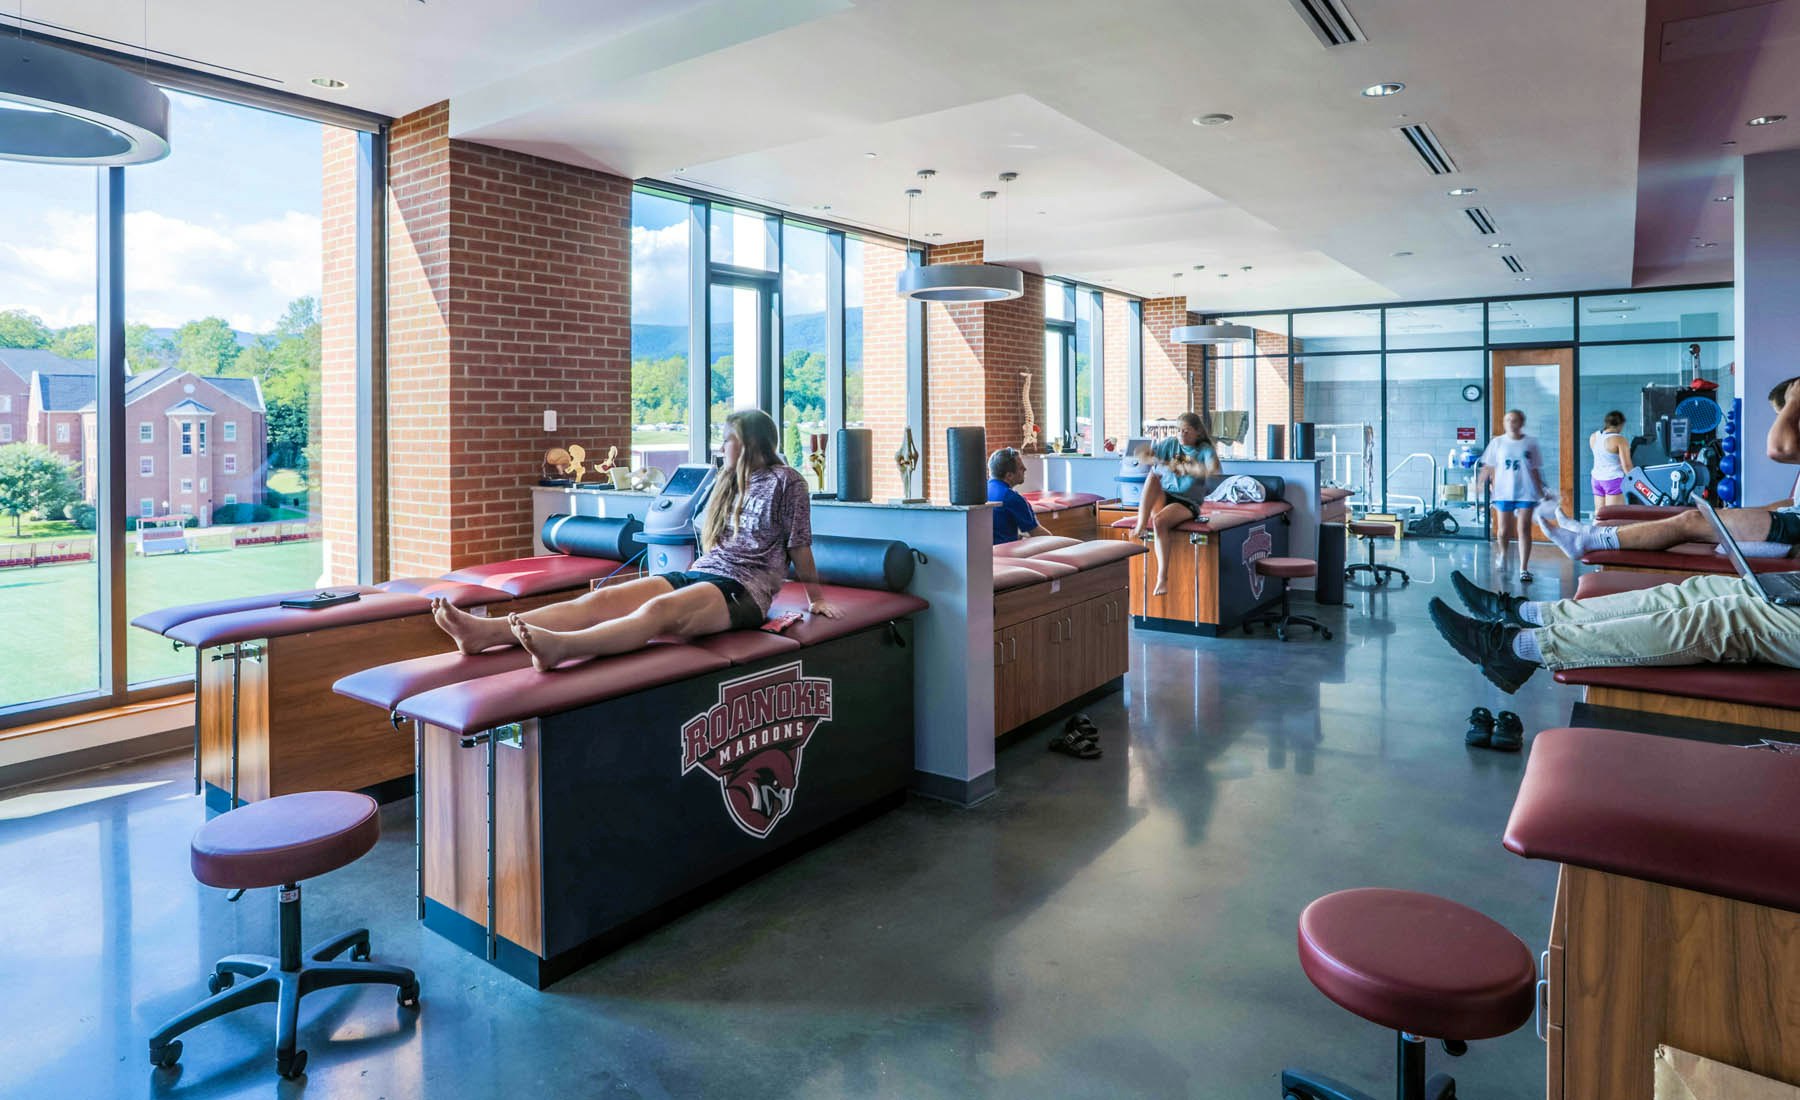 Integrated within the facility are faculty offices, classrooms, an athletic training clinic and lab space that support the popular Health and Human Performance (HHP) Department.